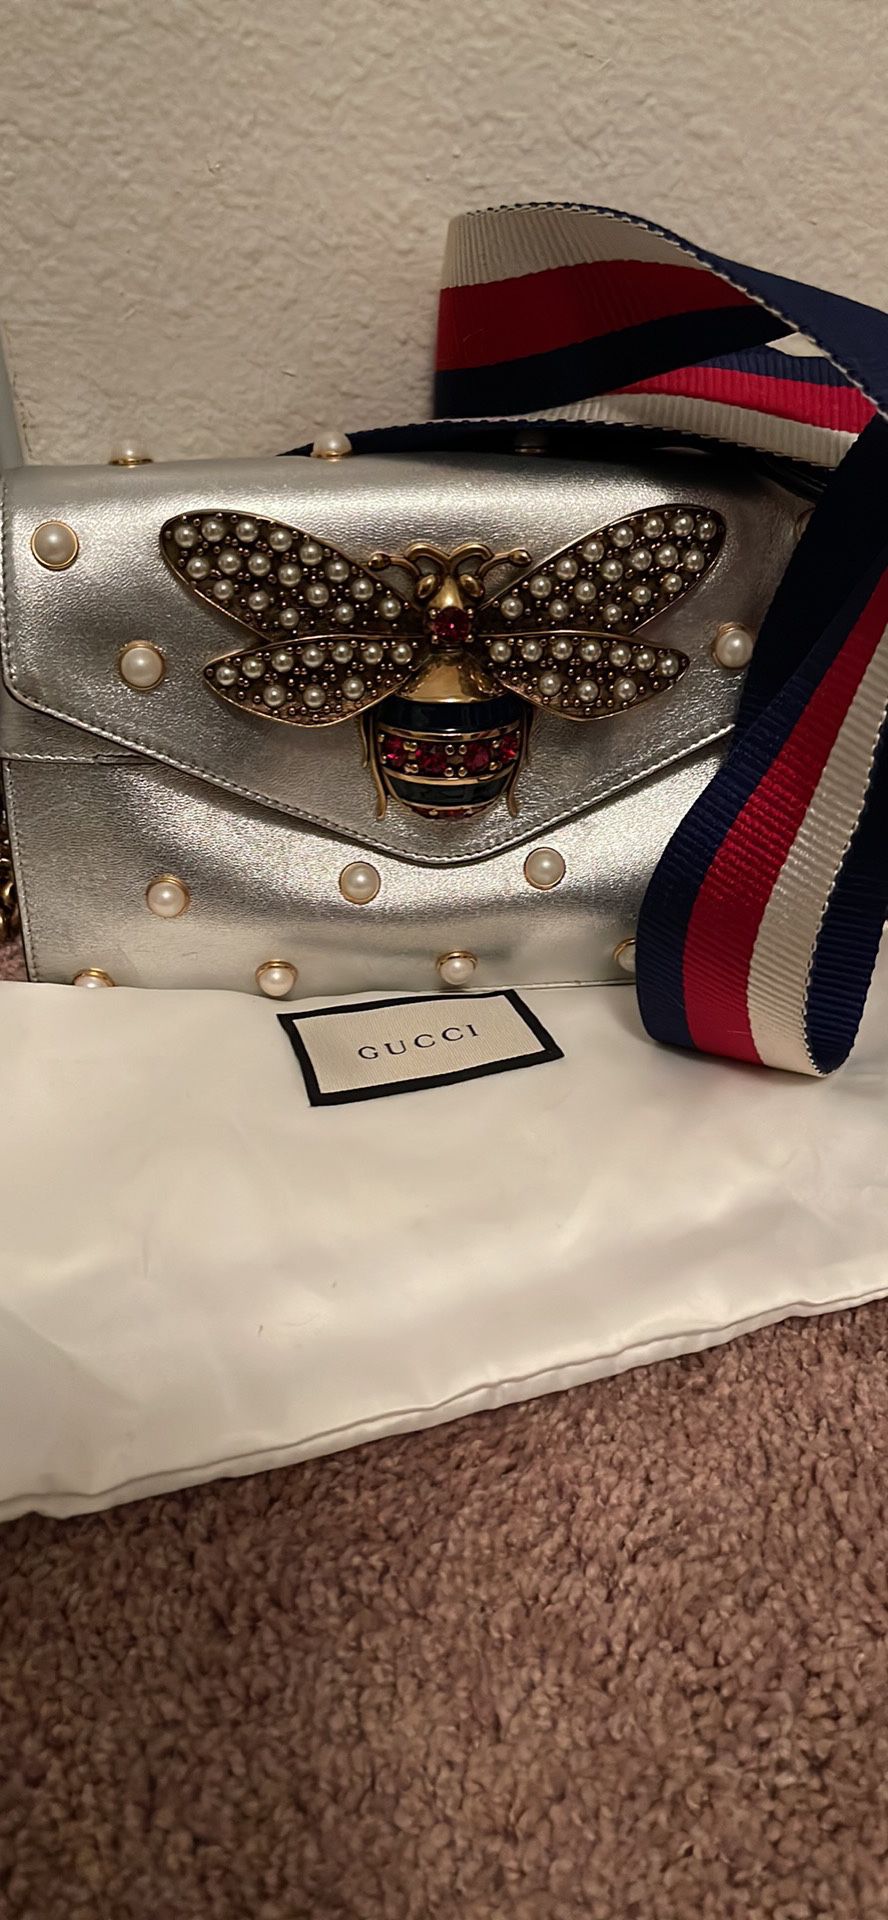 Gucci Embellished Broadway Bee Bag in Blue